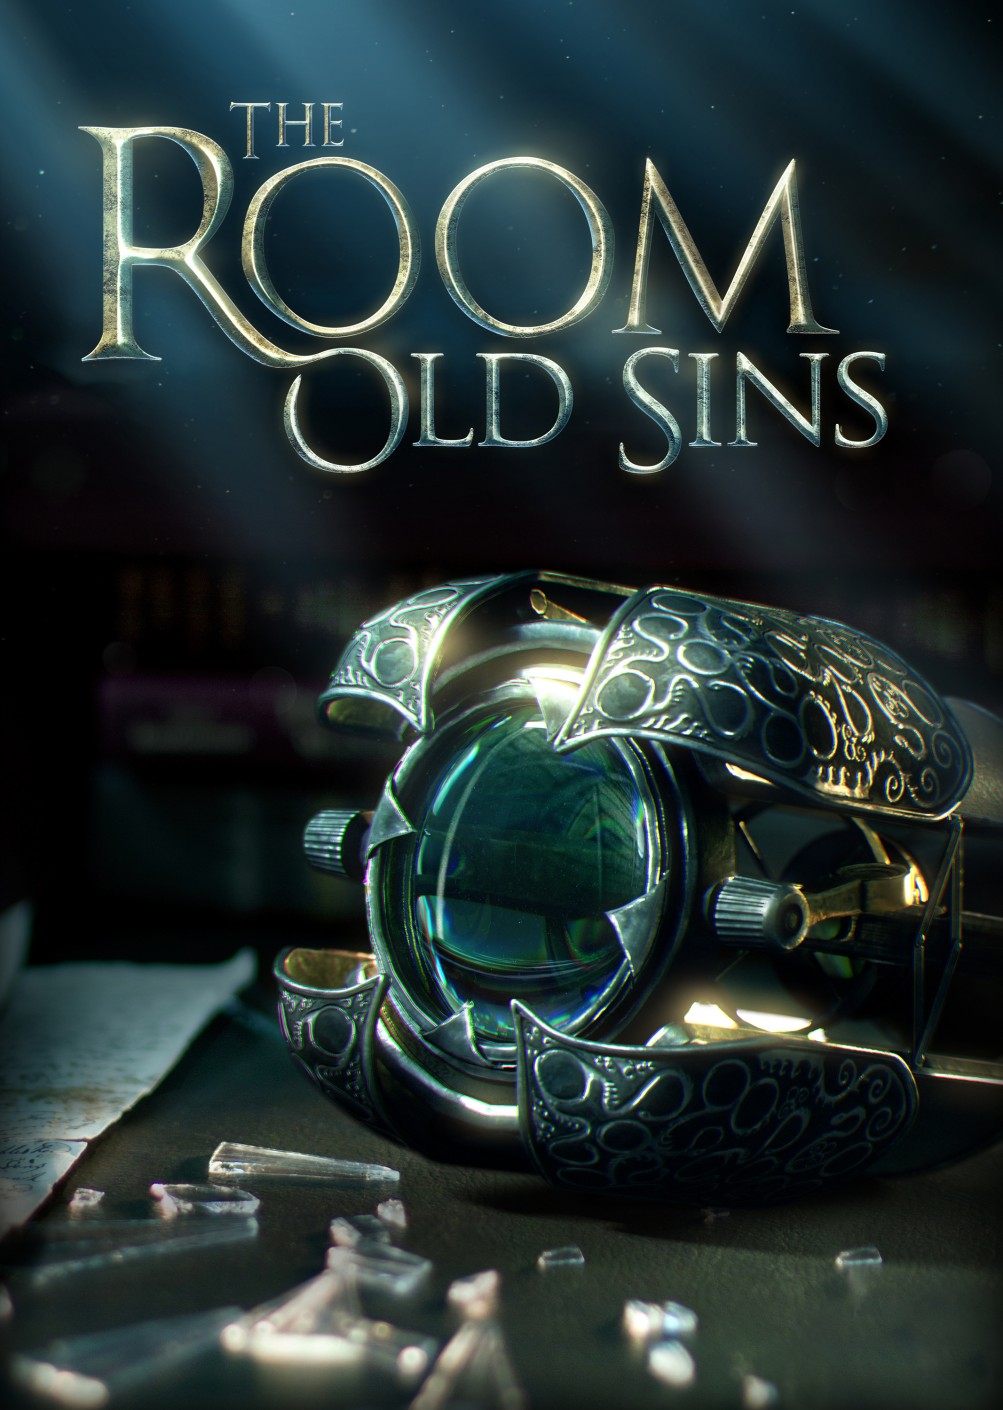 The Room: Old Sins' Review: 'The Room' Series Continues to Amaze